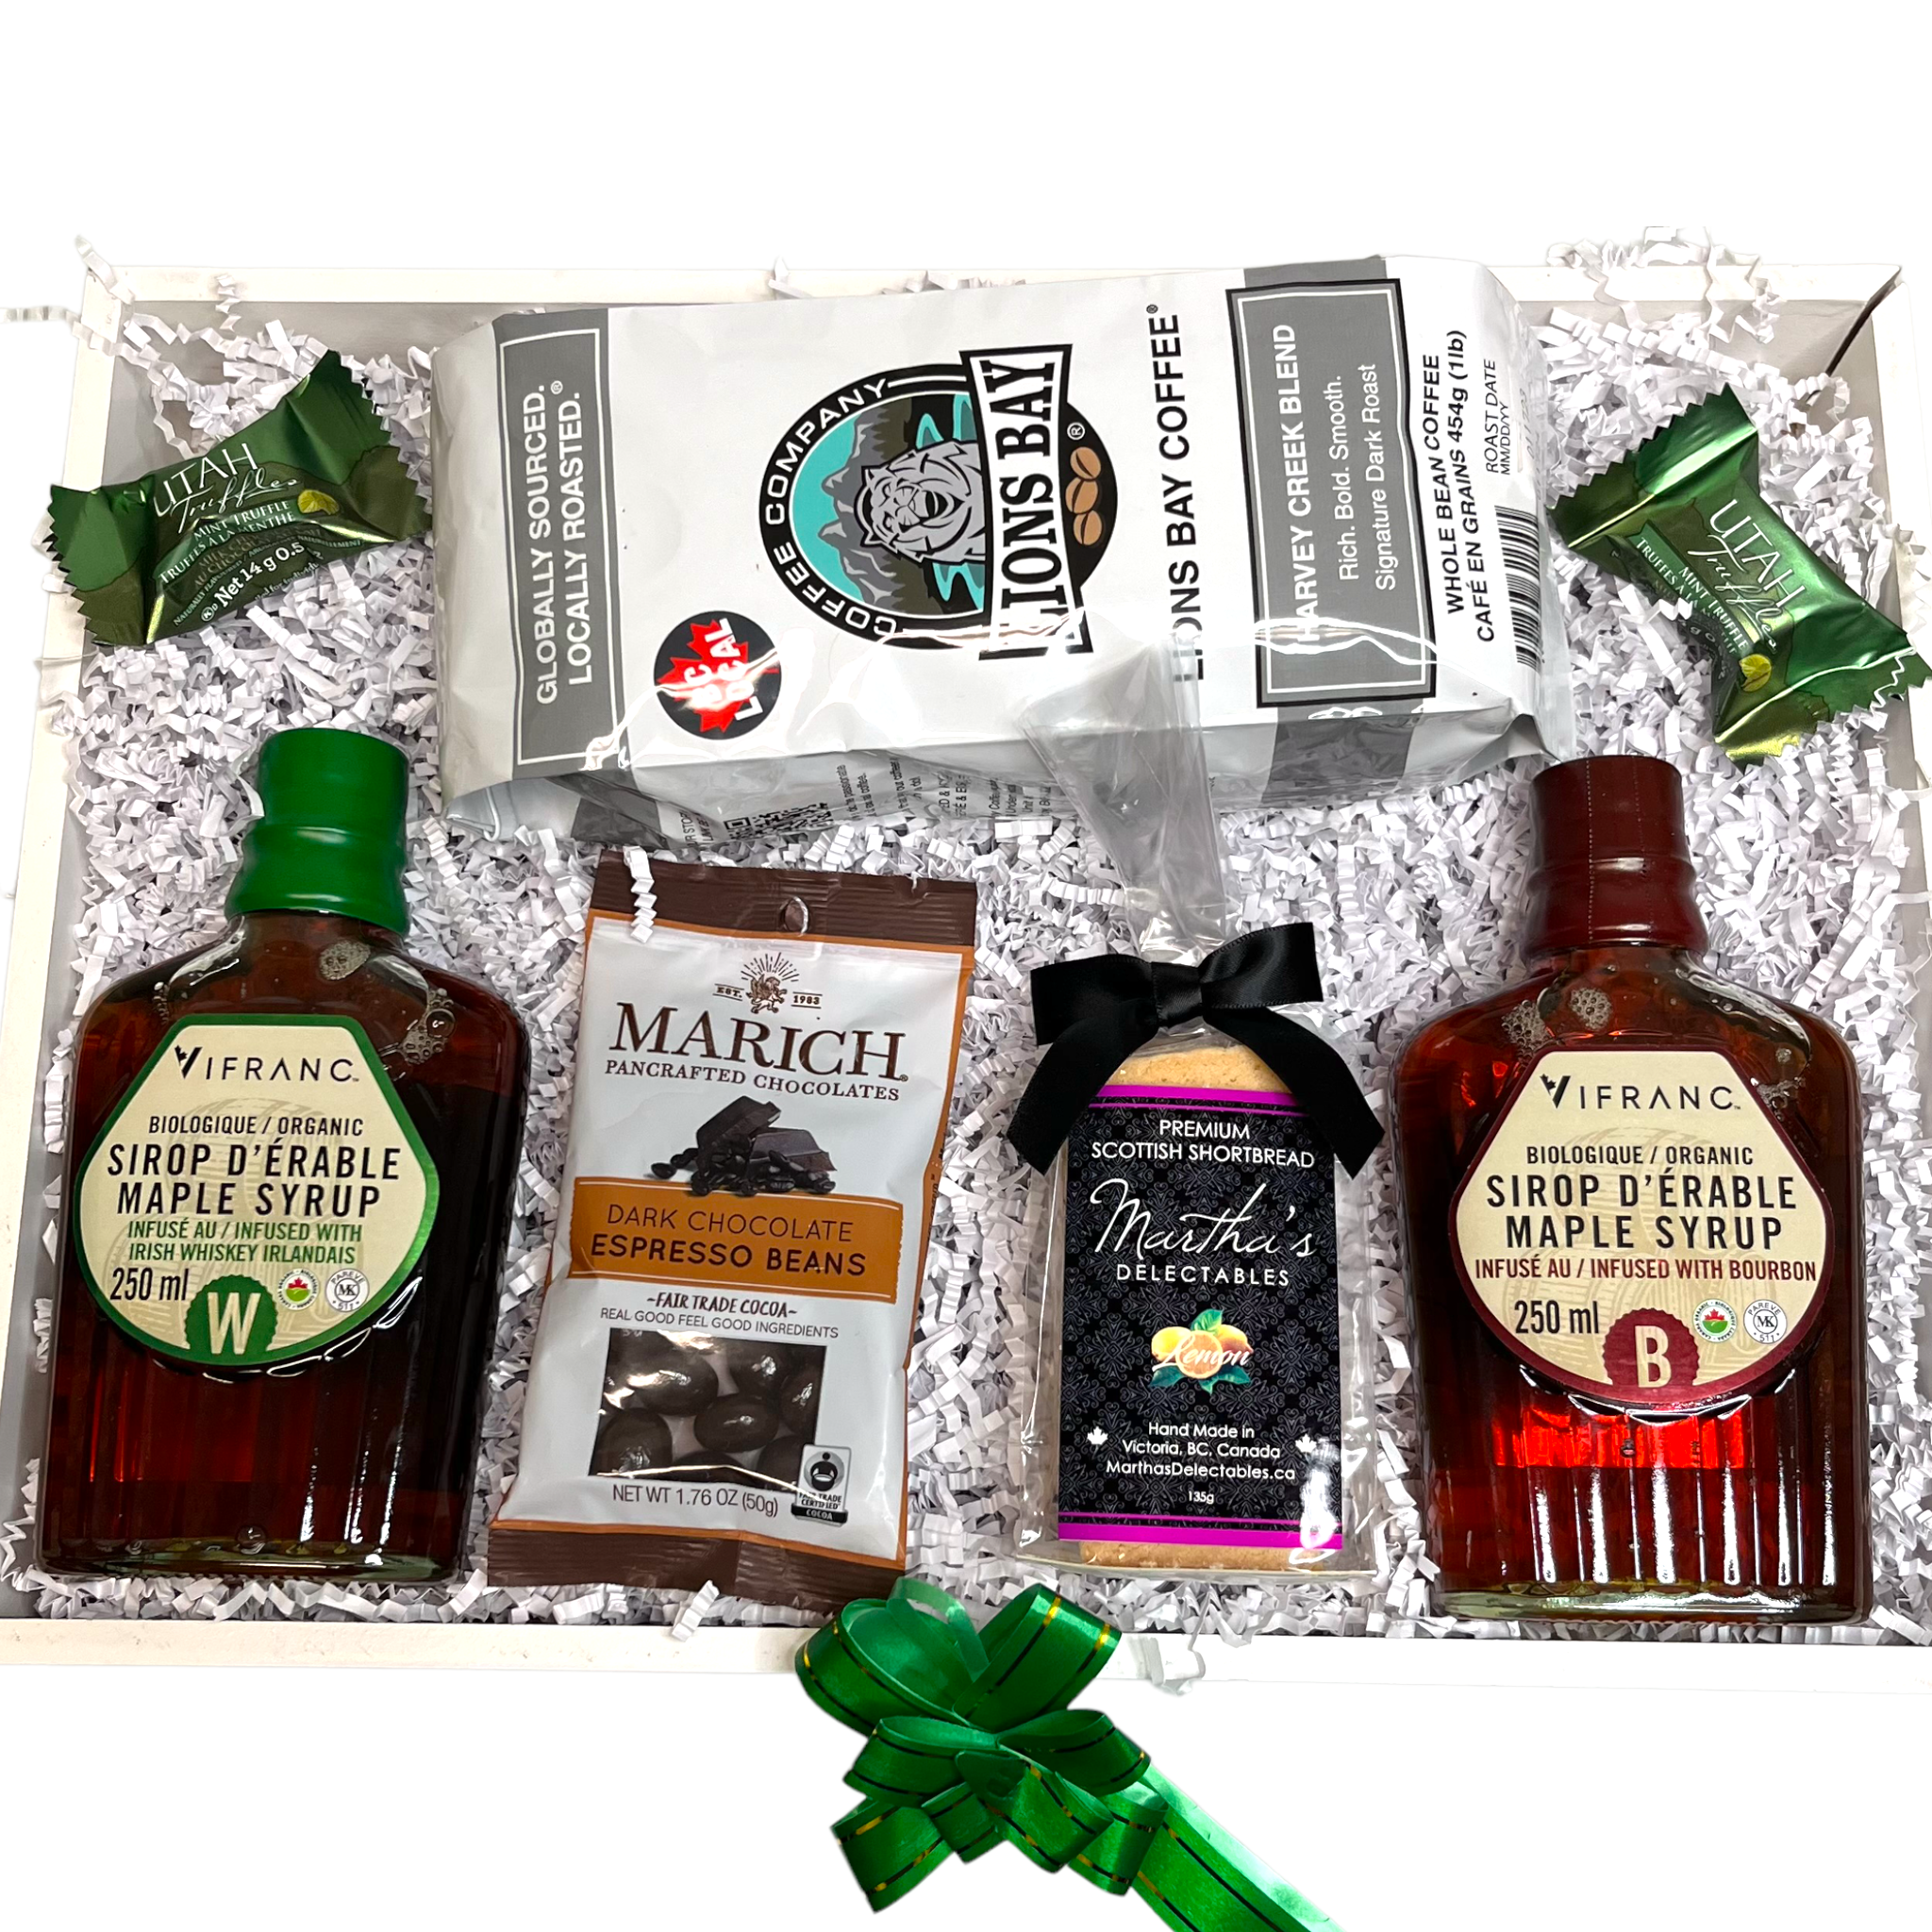 An assortment of items in a gift basket to convey appreciation